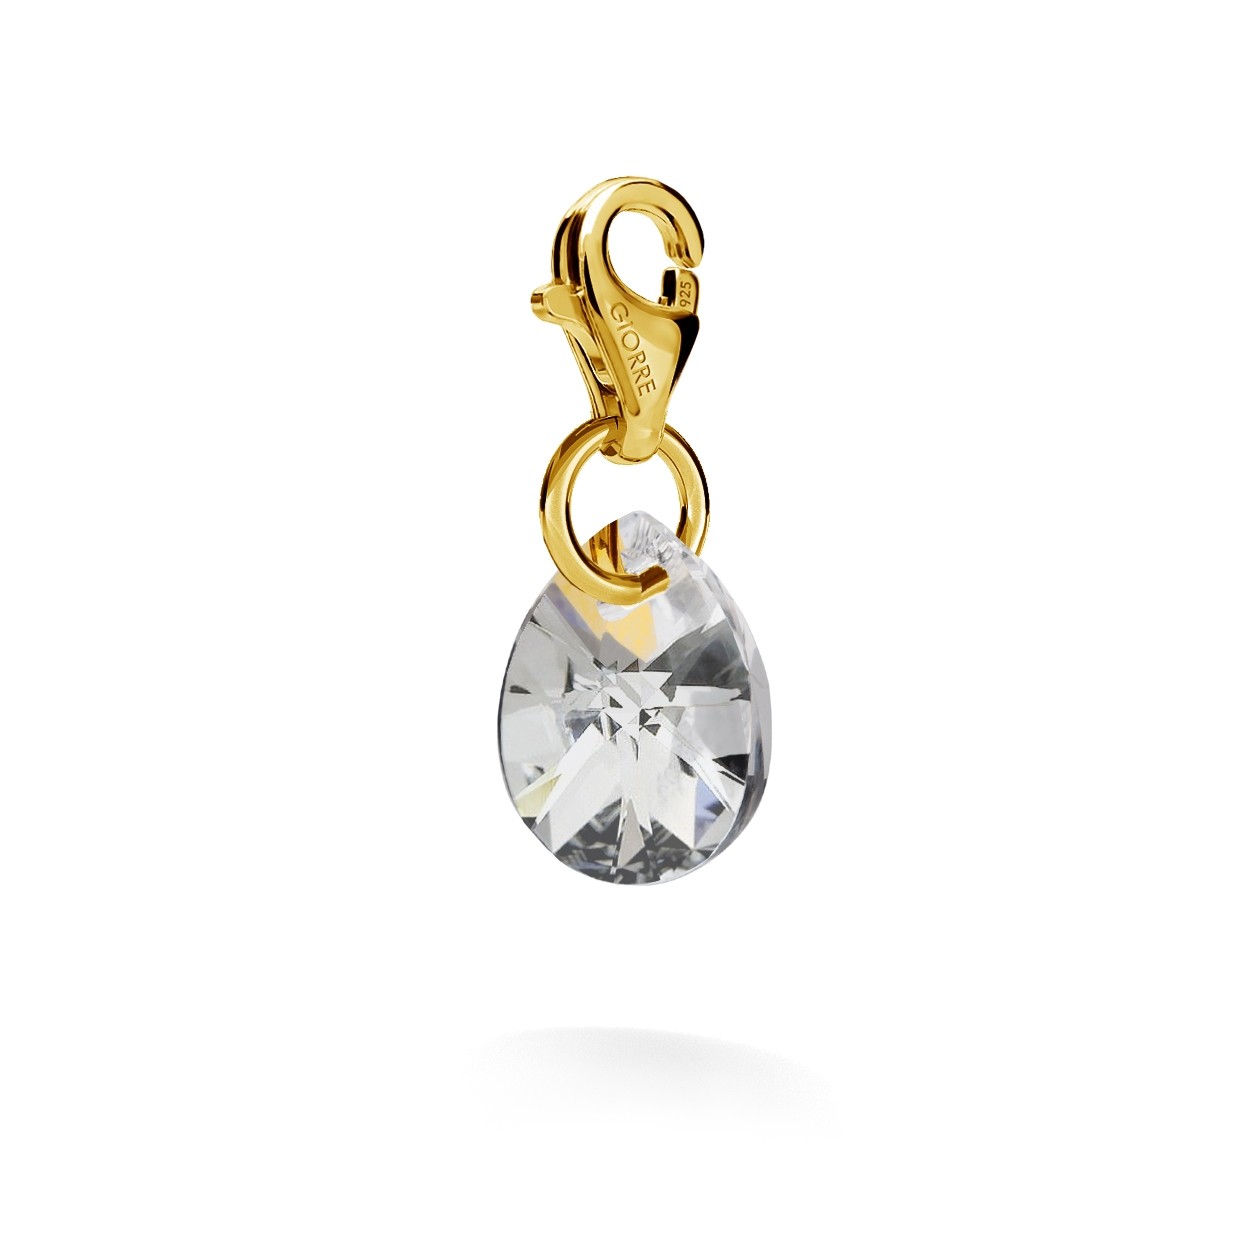 CHARMS 51, SWAROVSKI 6128 MM 12 CRYSTAL, STERLING SILVER (925) RHODIUM OR GOLD PLATED